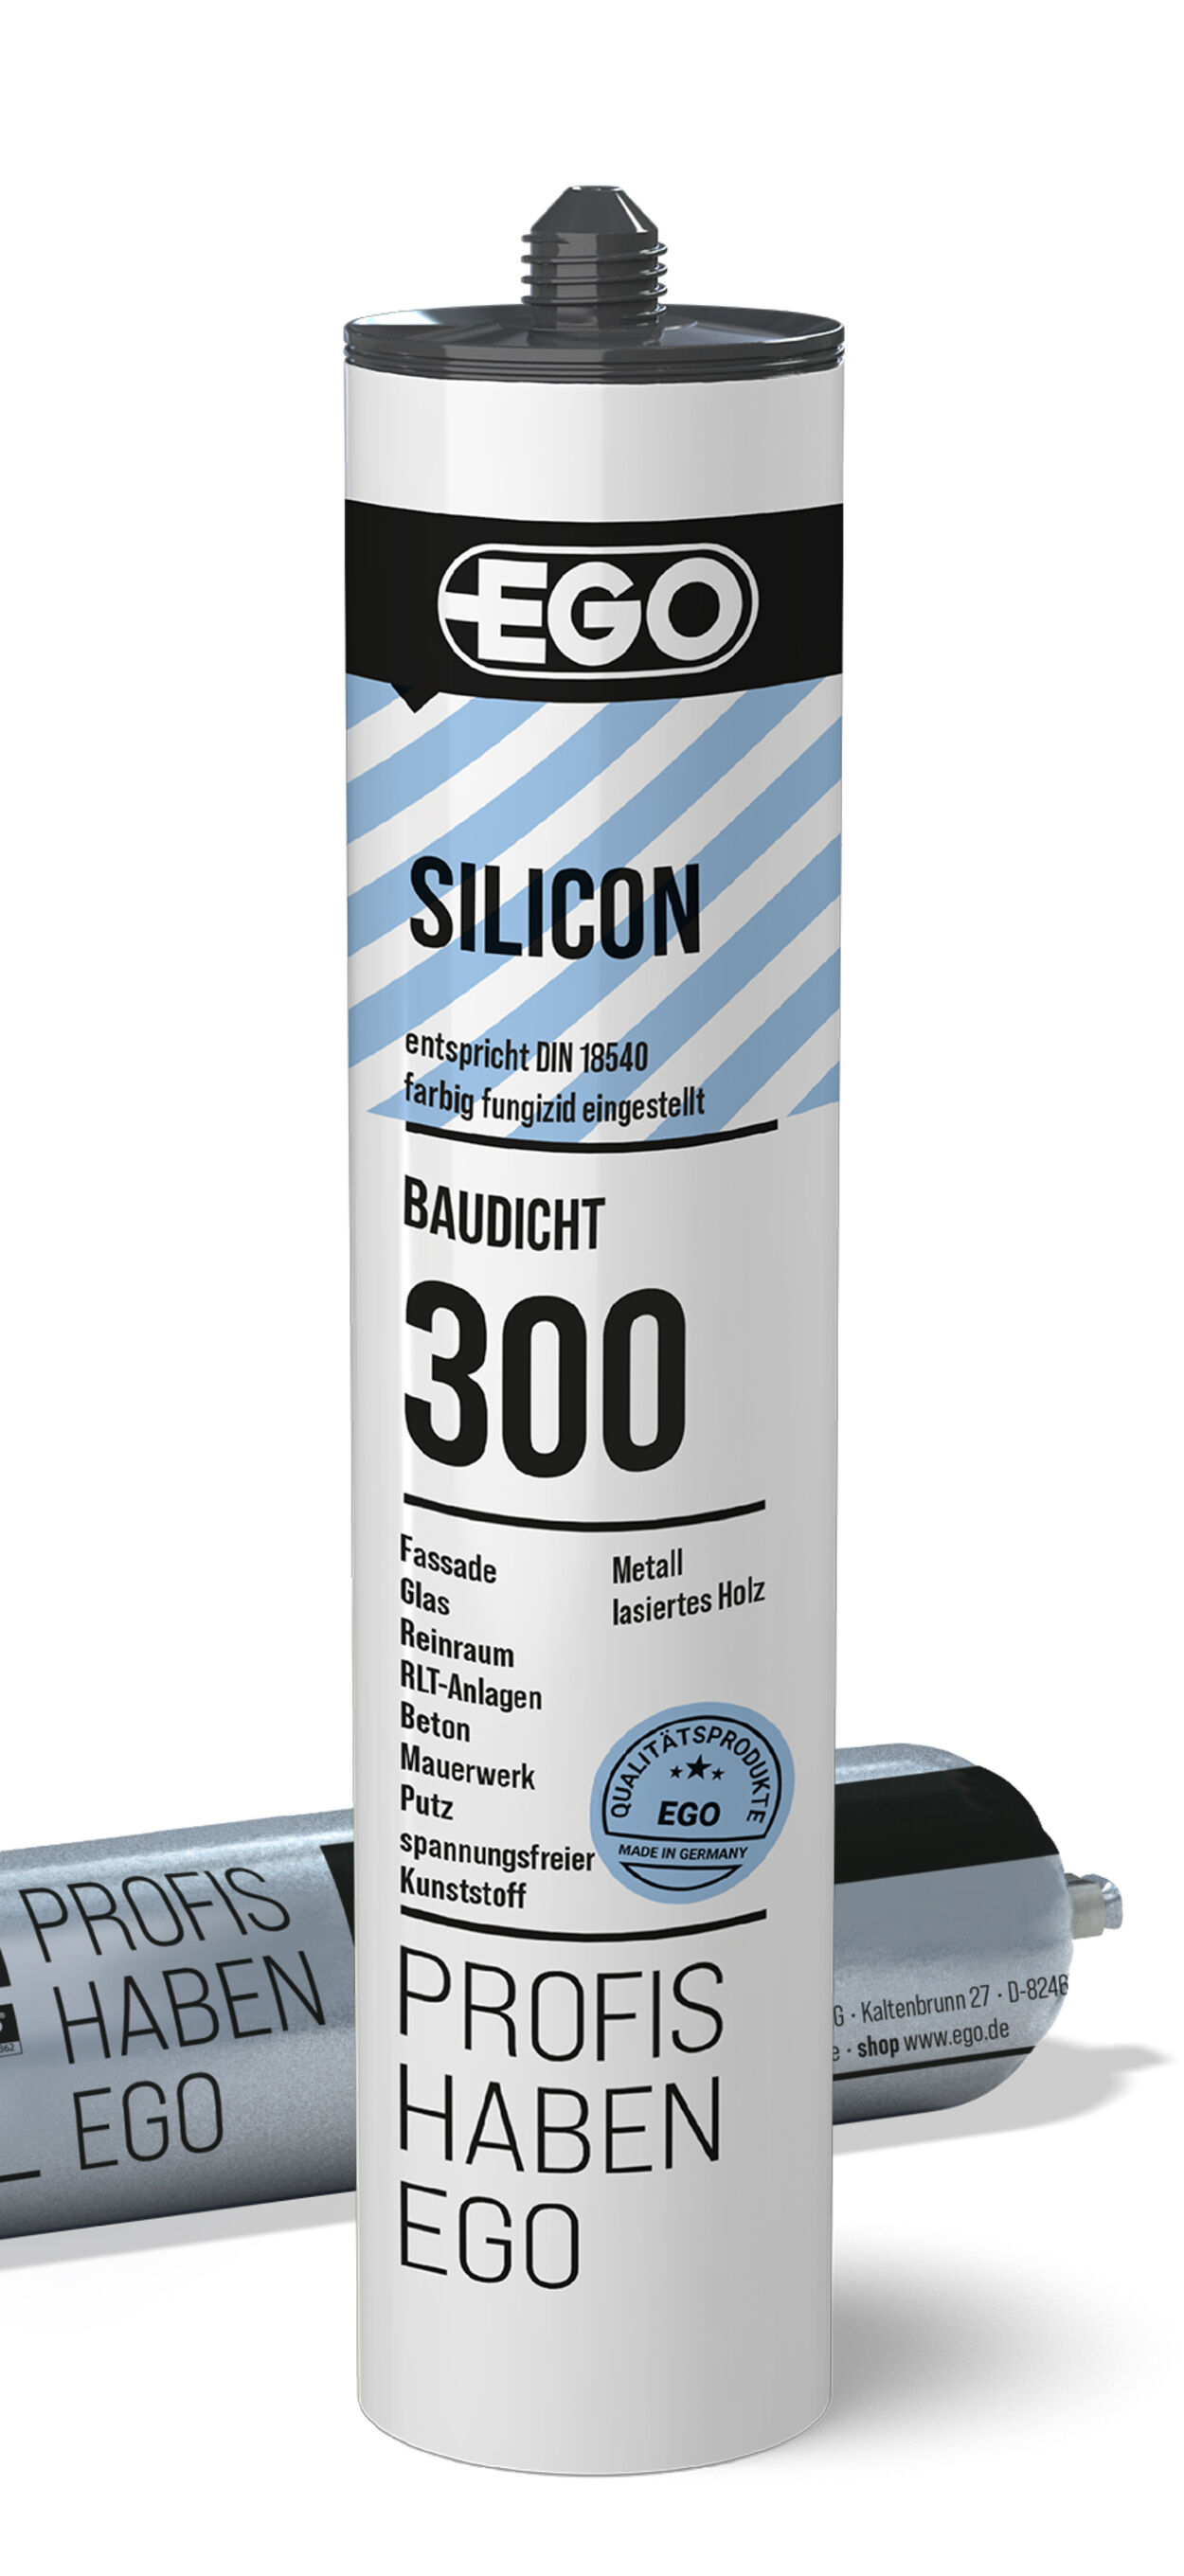 Silicone sealant for building sealing